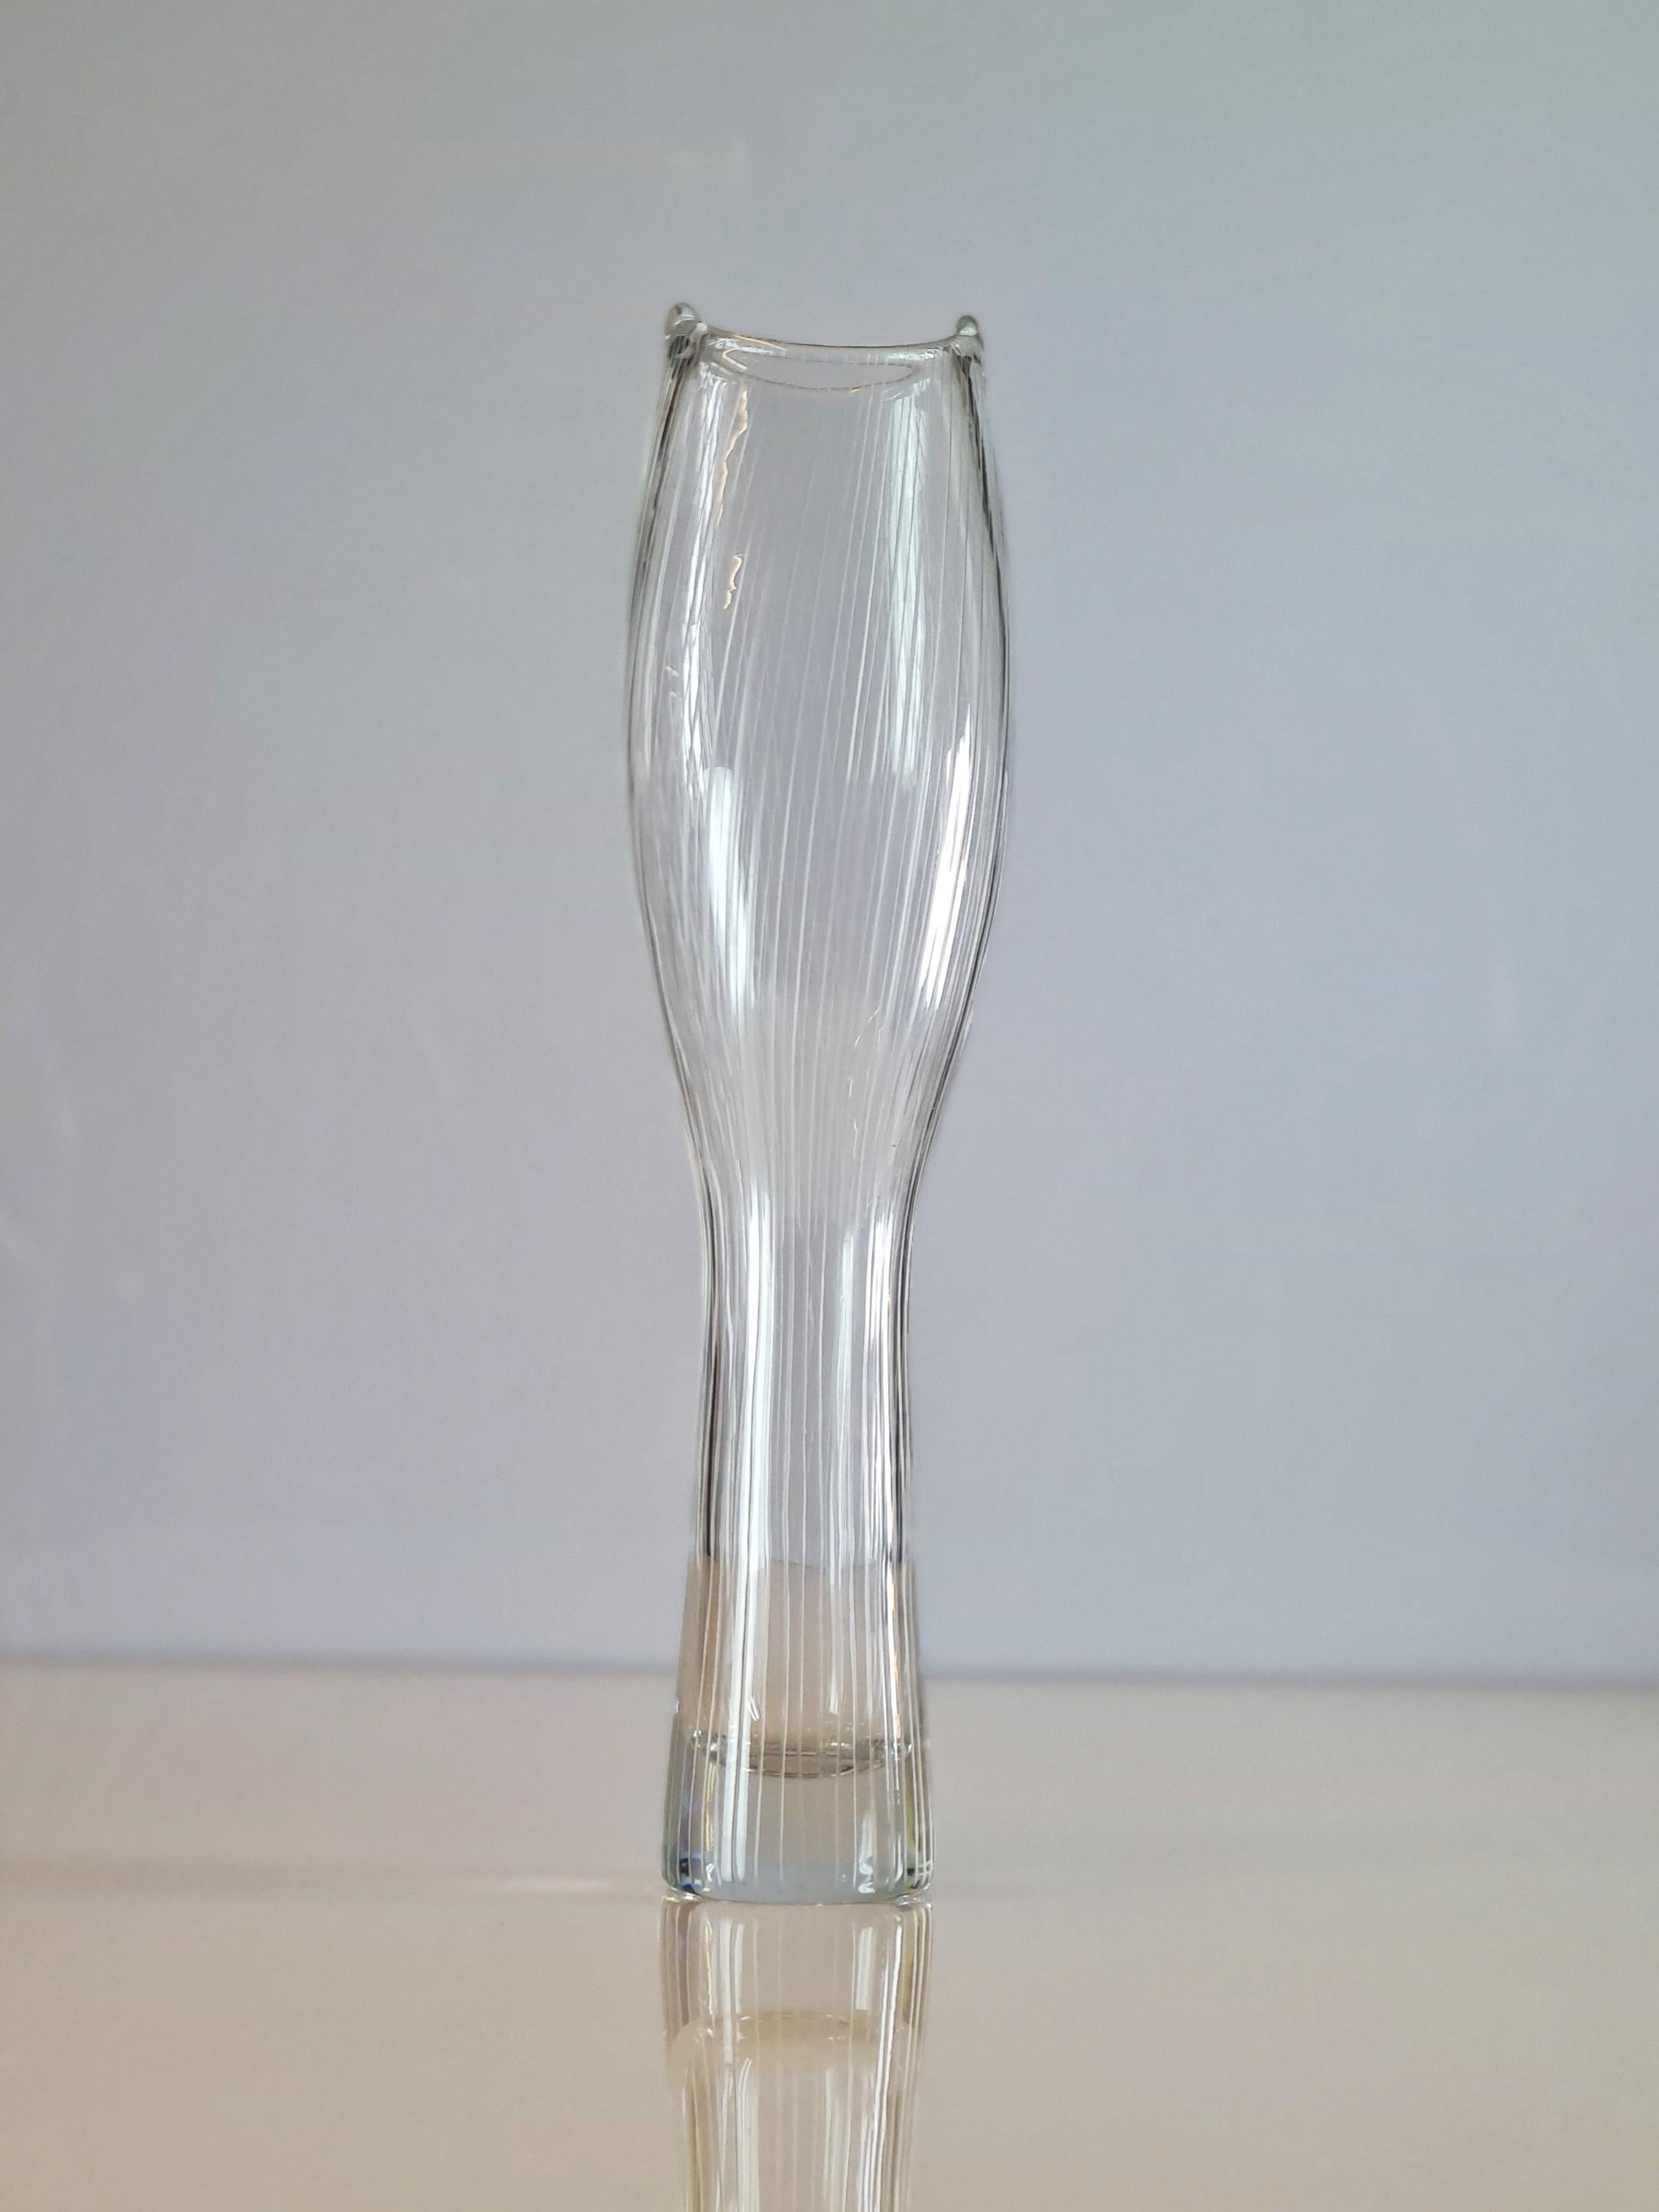 A beautiful vase/art glass object named the 